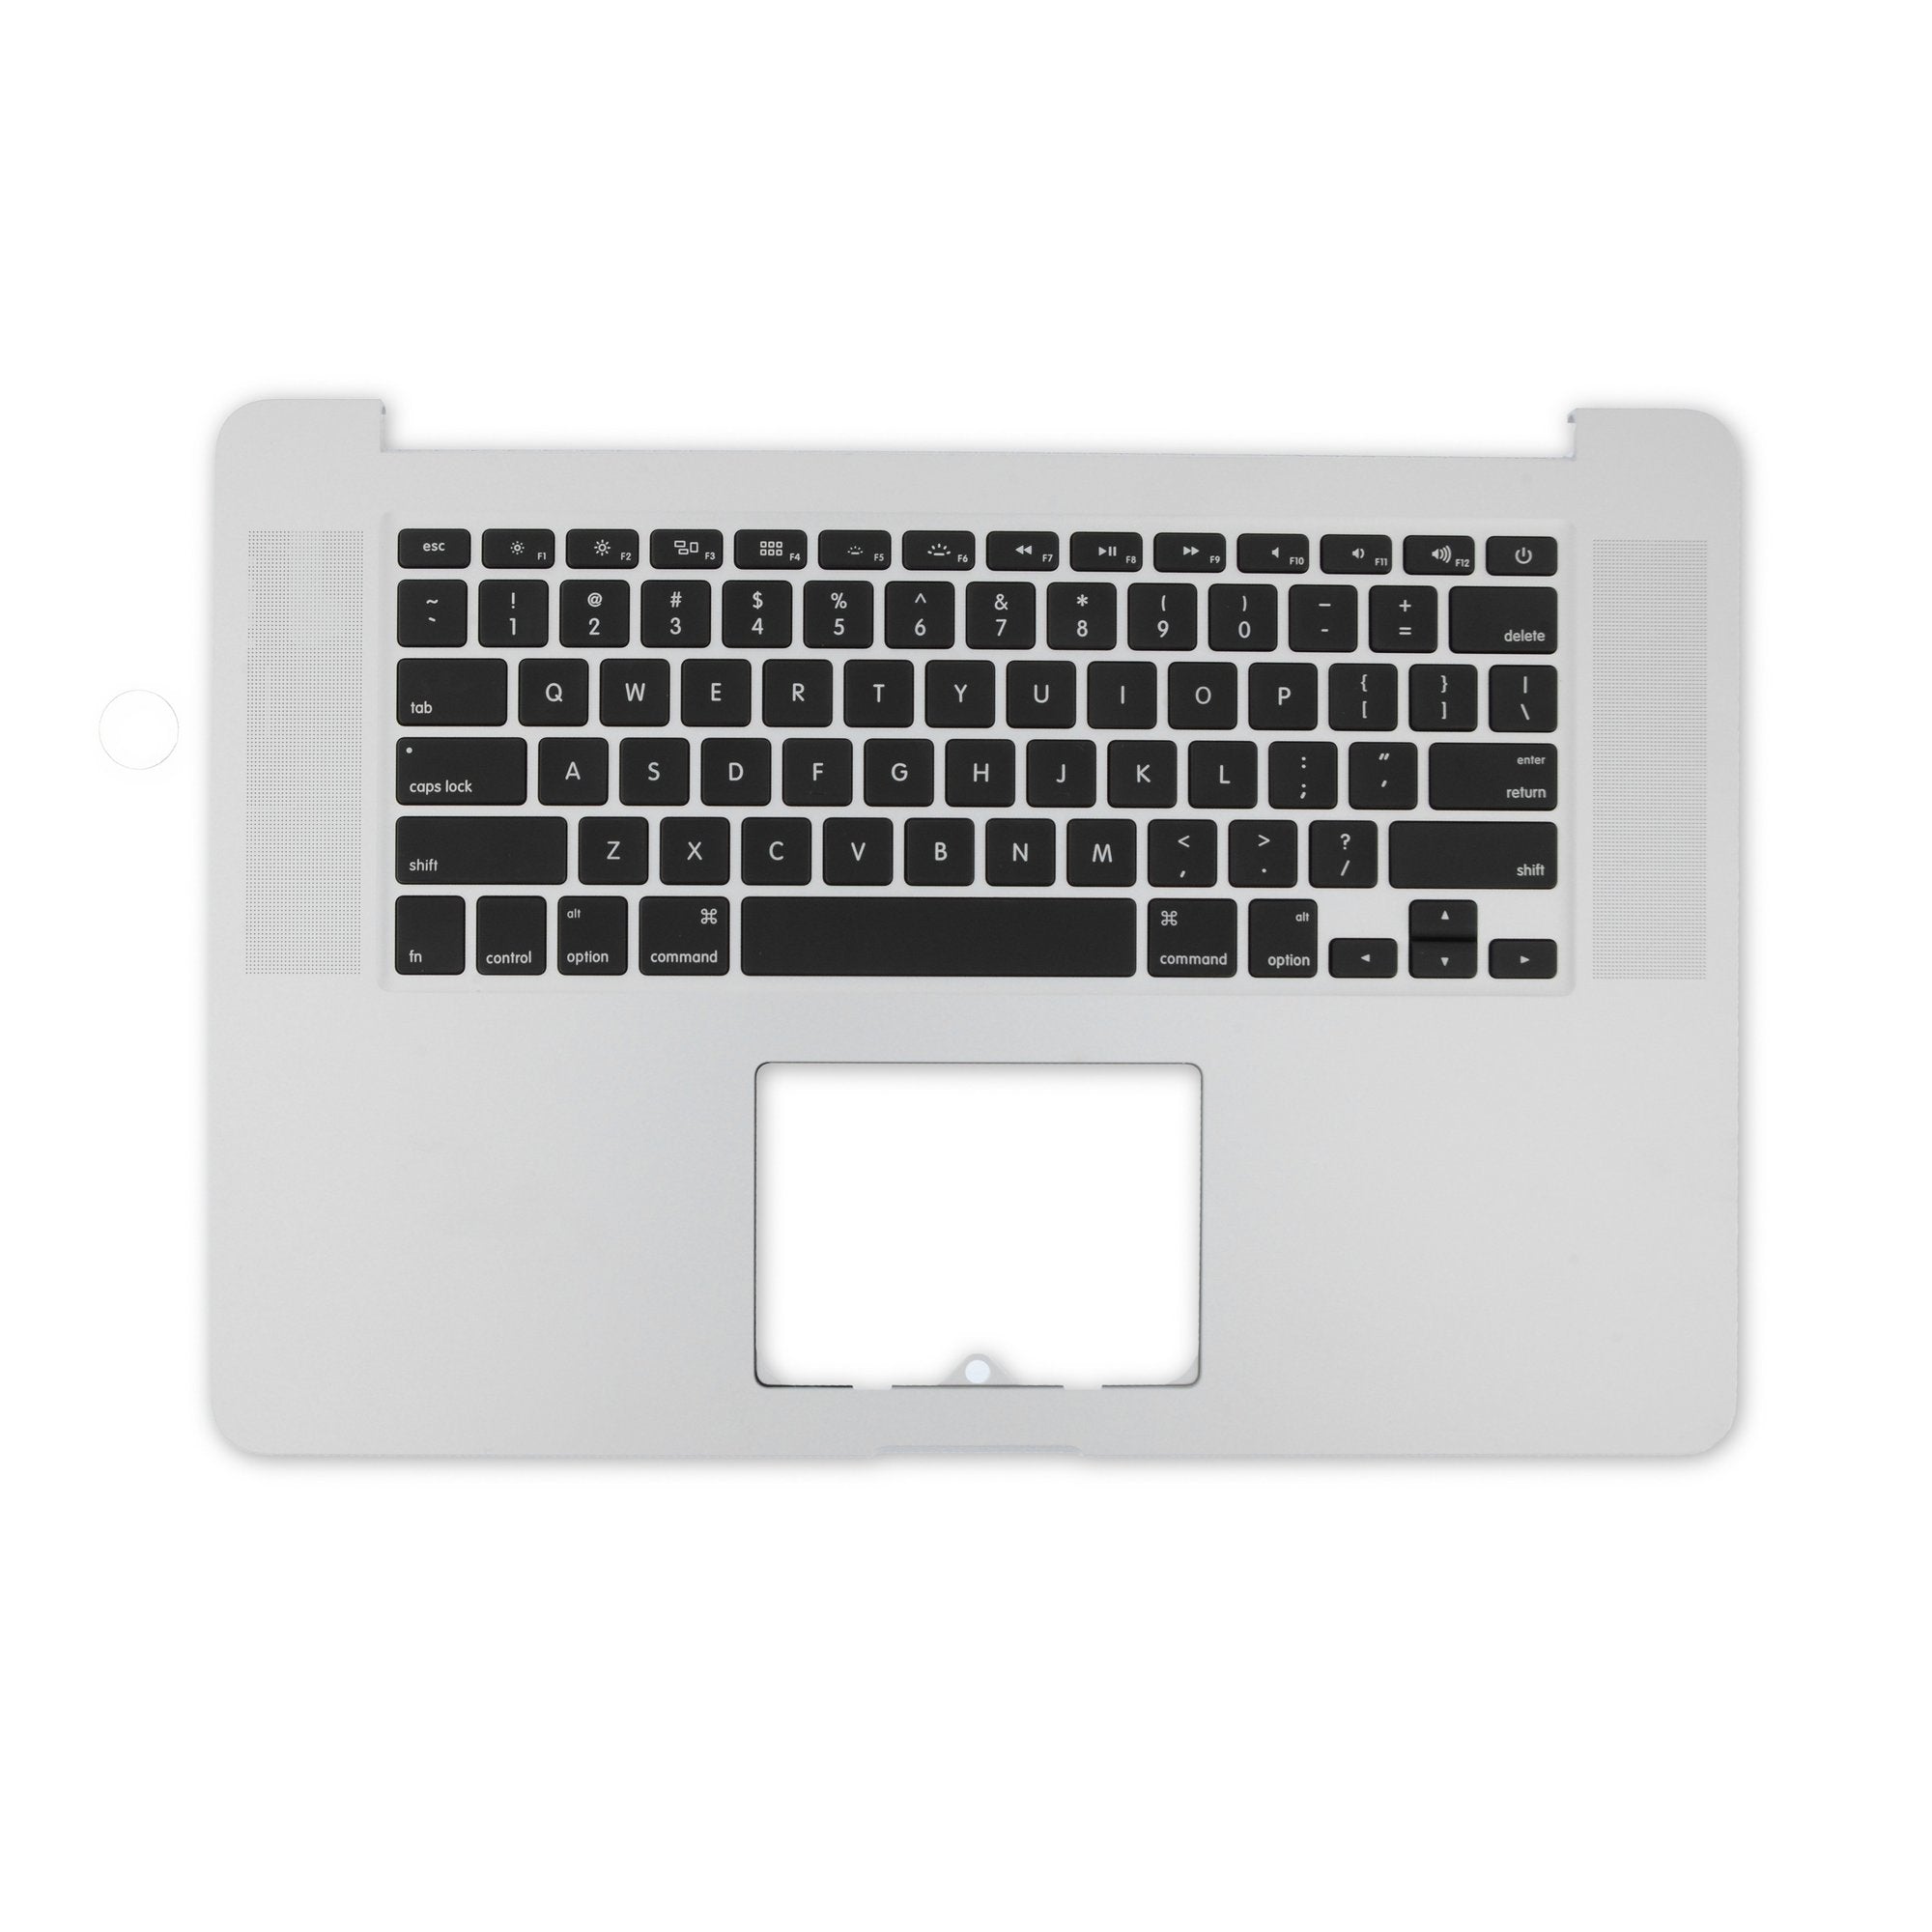 MacBook Pro 15" Retina (Late 2013-Mid 2014) Upper Case Assembly Used, B-Stock No Trackpad or Battery